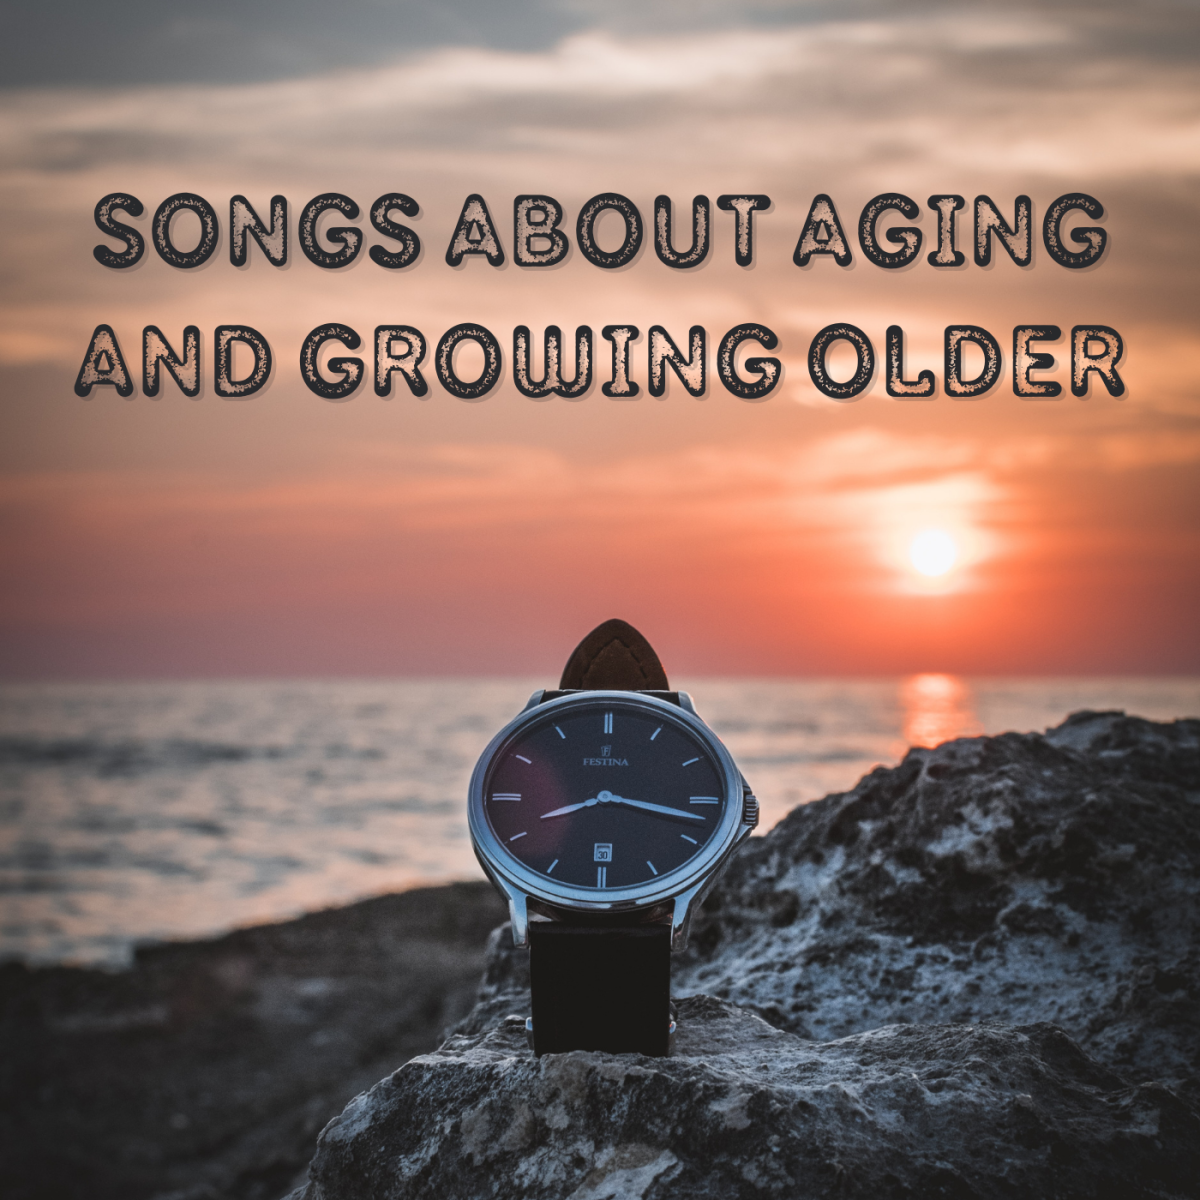 Time stops for no one, so why curse what you cannot control? Instead, celebrate growing older with these pop, rock, and country songs.